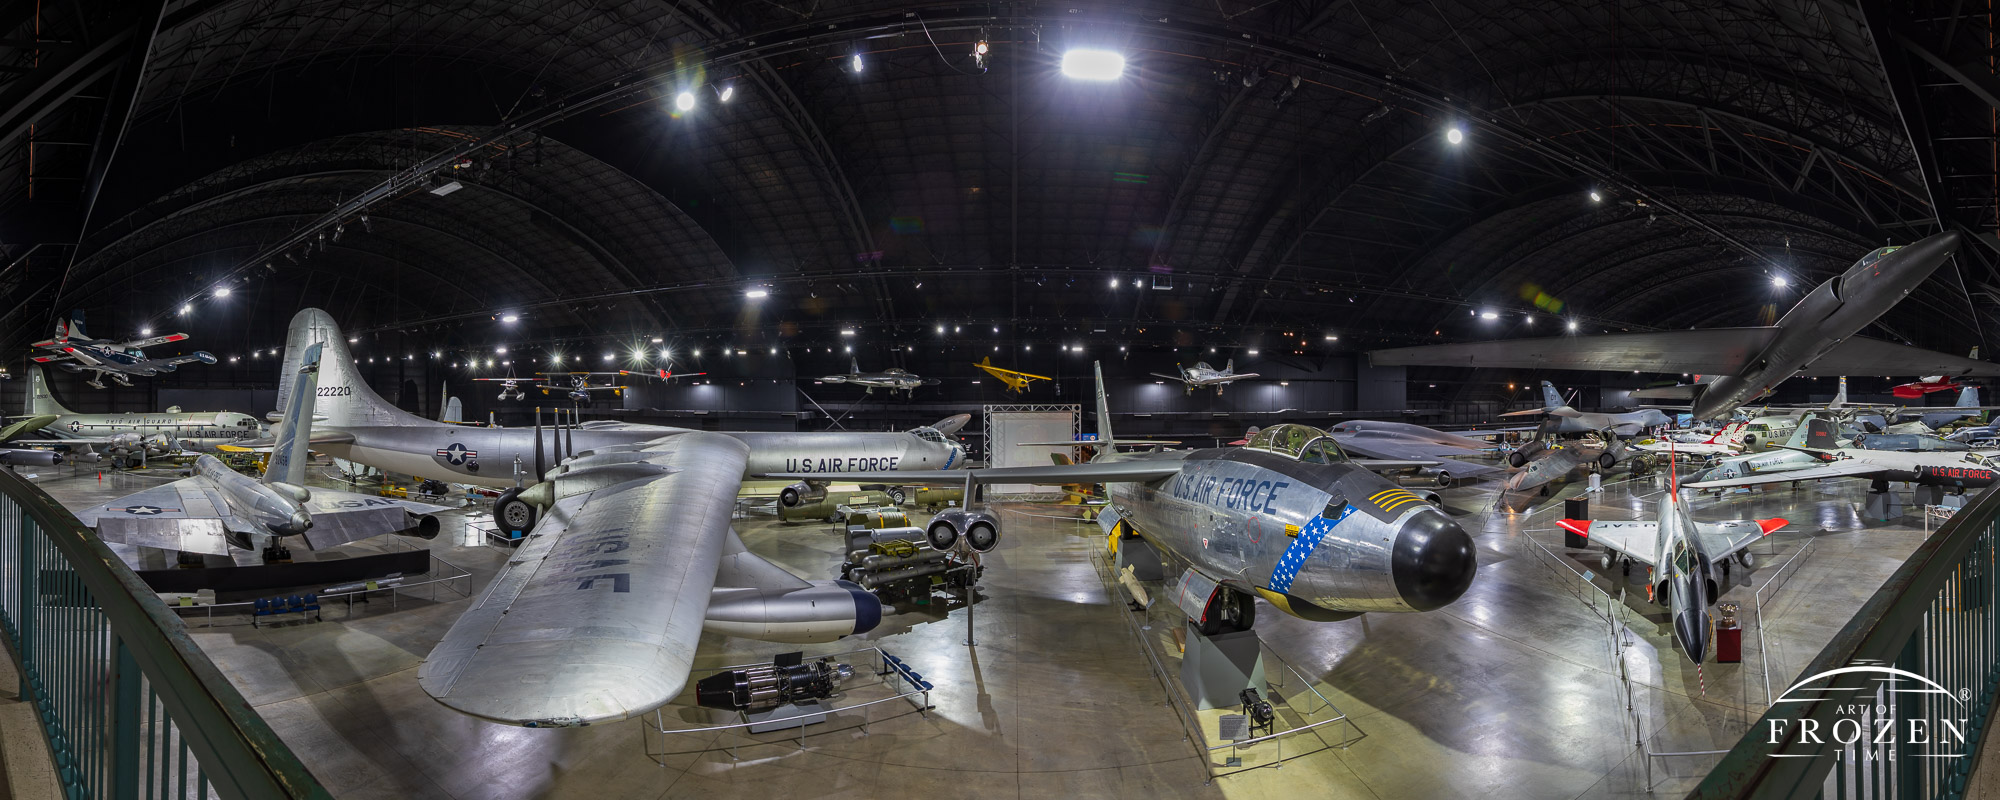 A panoramic view of a hanger in the National Museum of the US Air Force featuring aircraft which served in the Cold War